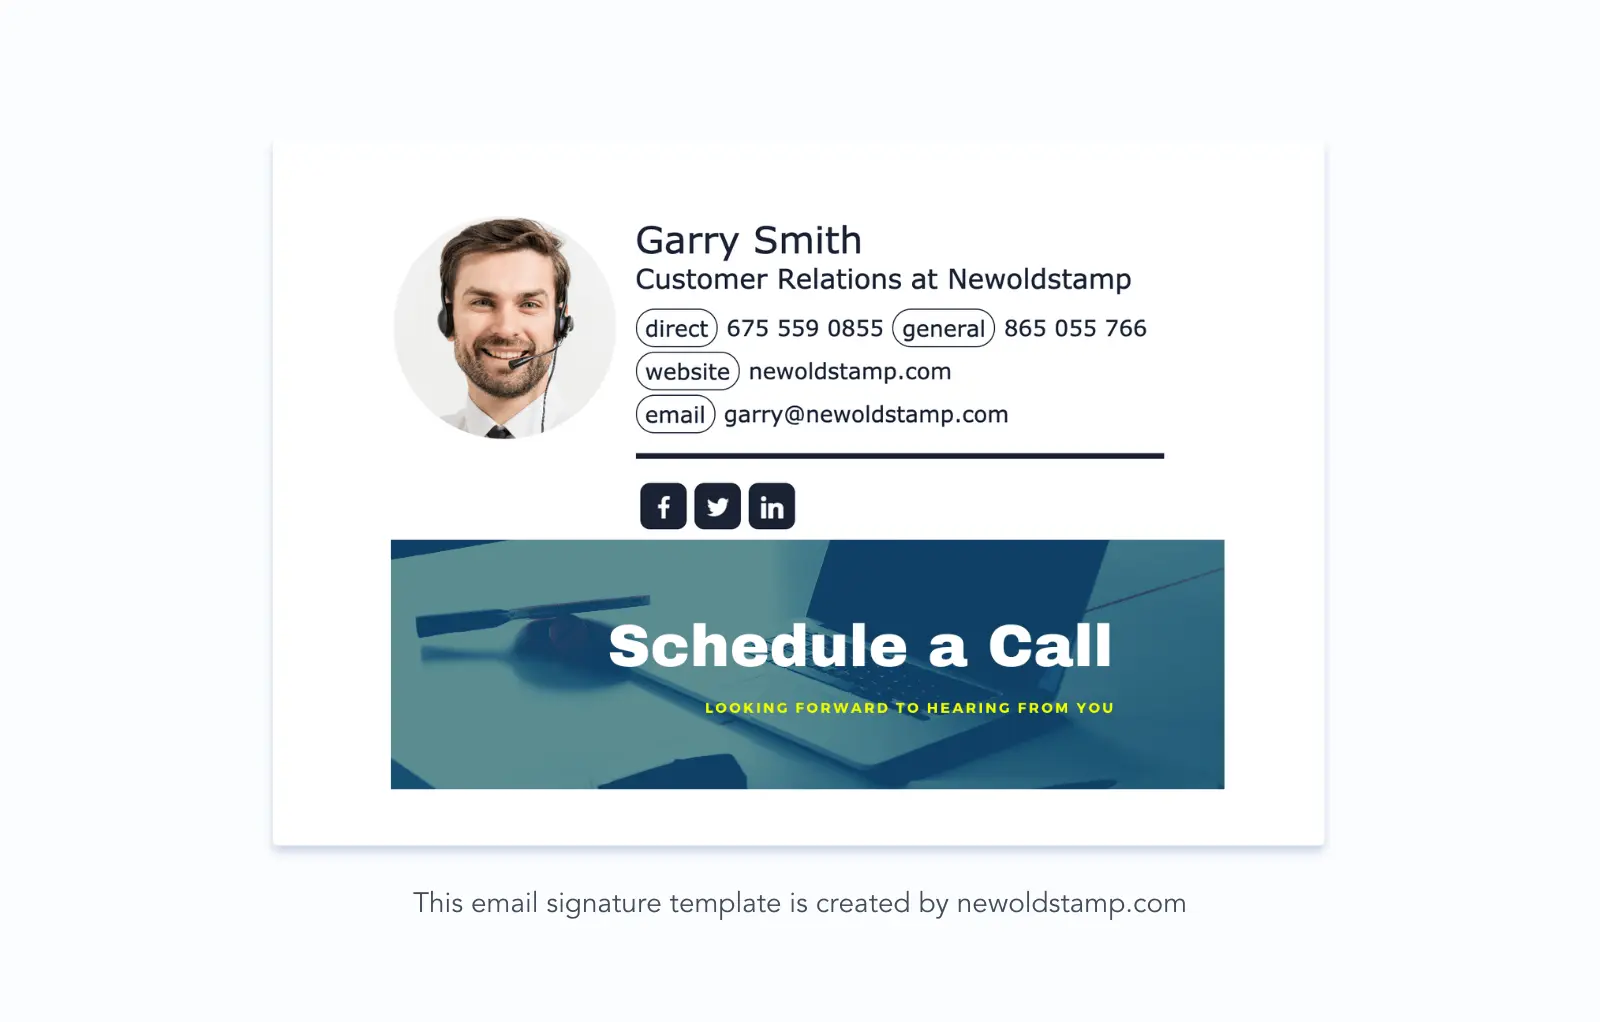 Example of an email signature with a banner